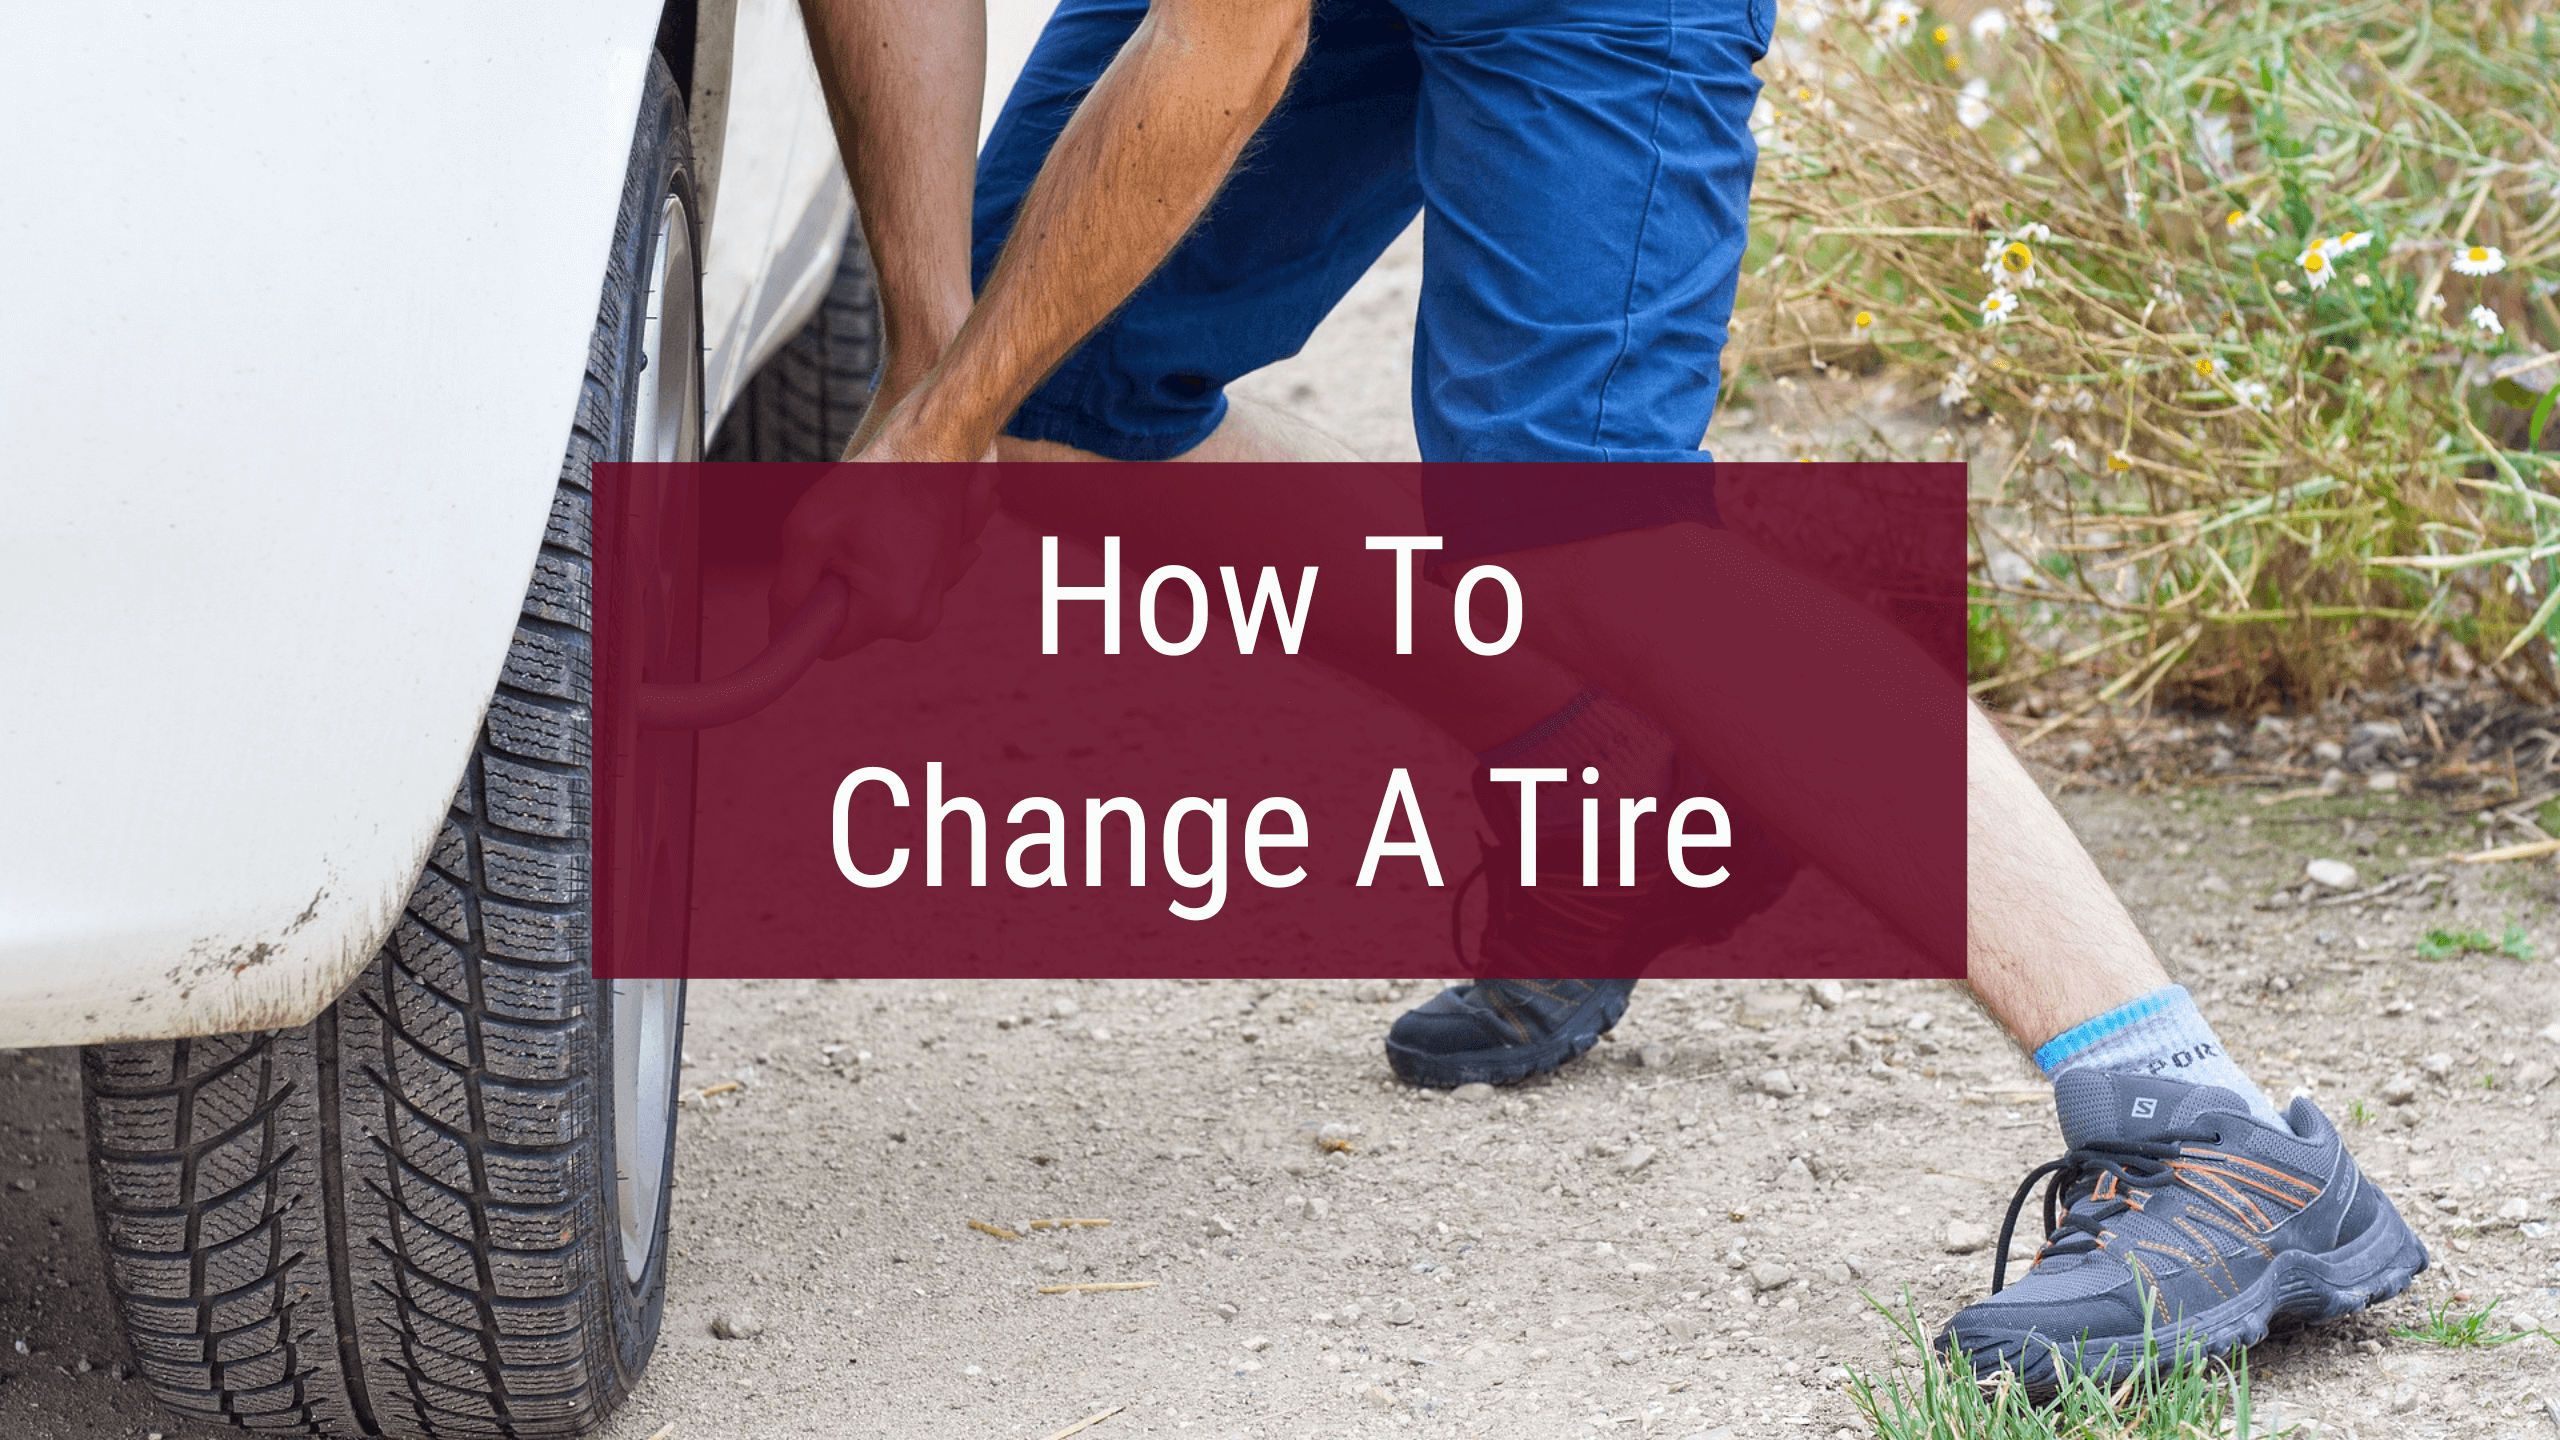 How to change a truck or car tire.